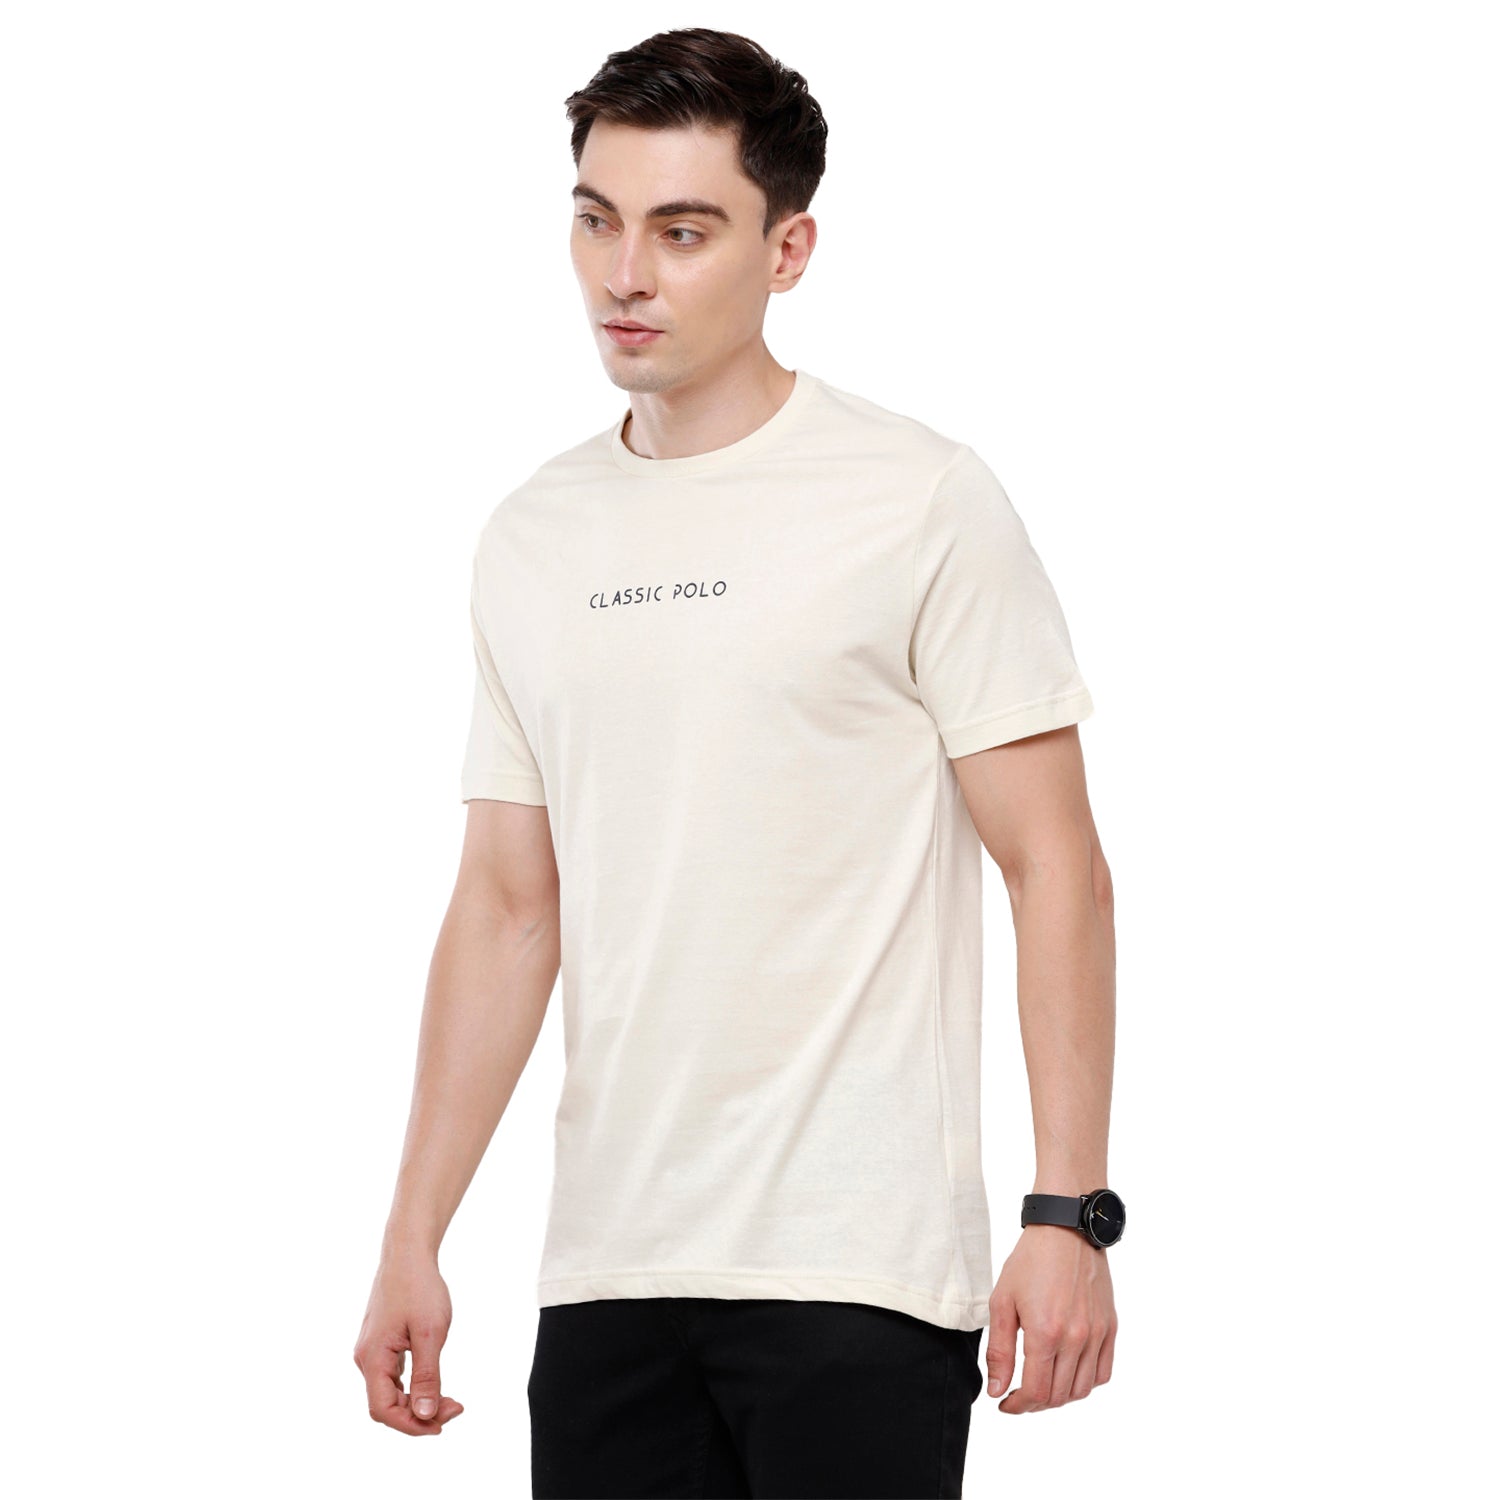 Classic polo Men's Basic Solid Single Jersey Crew Half Sleeve Slim Fit T-Shirt ( Trio Pack) - Ceres - 02 Classic Polo 